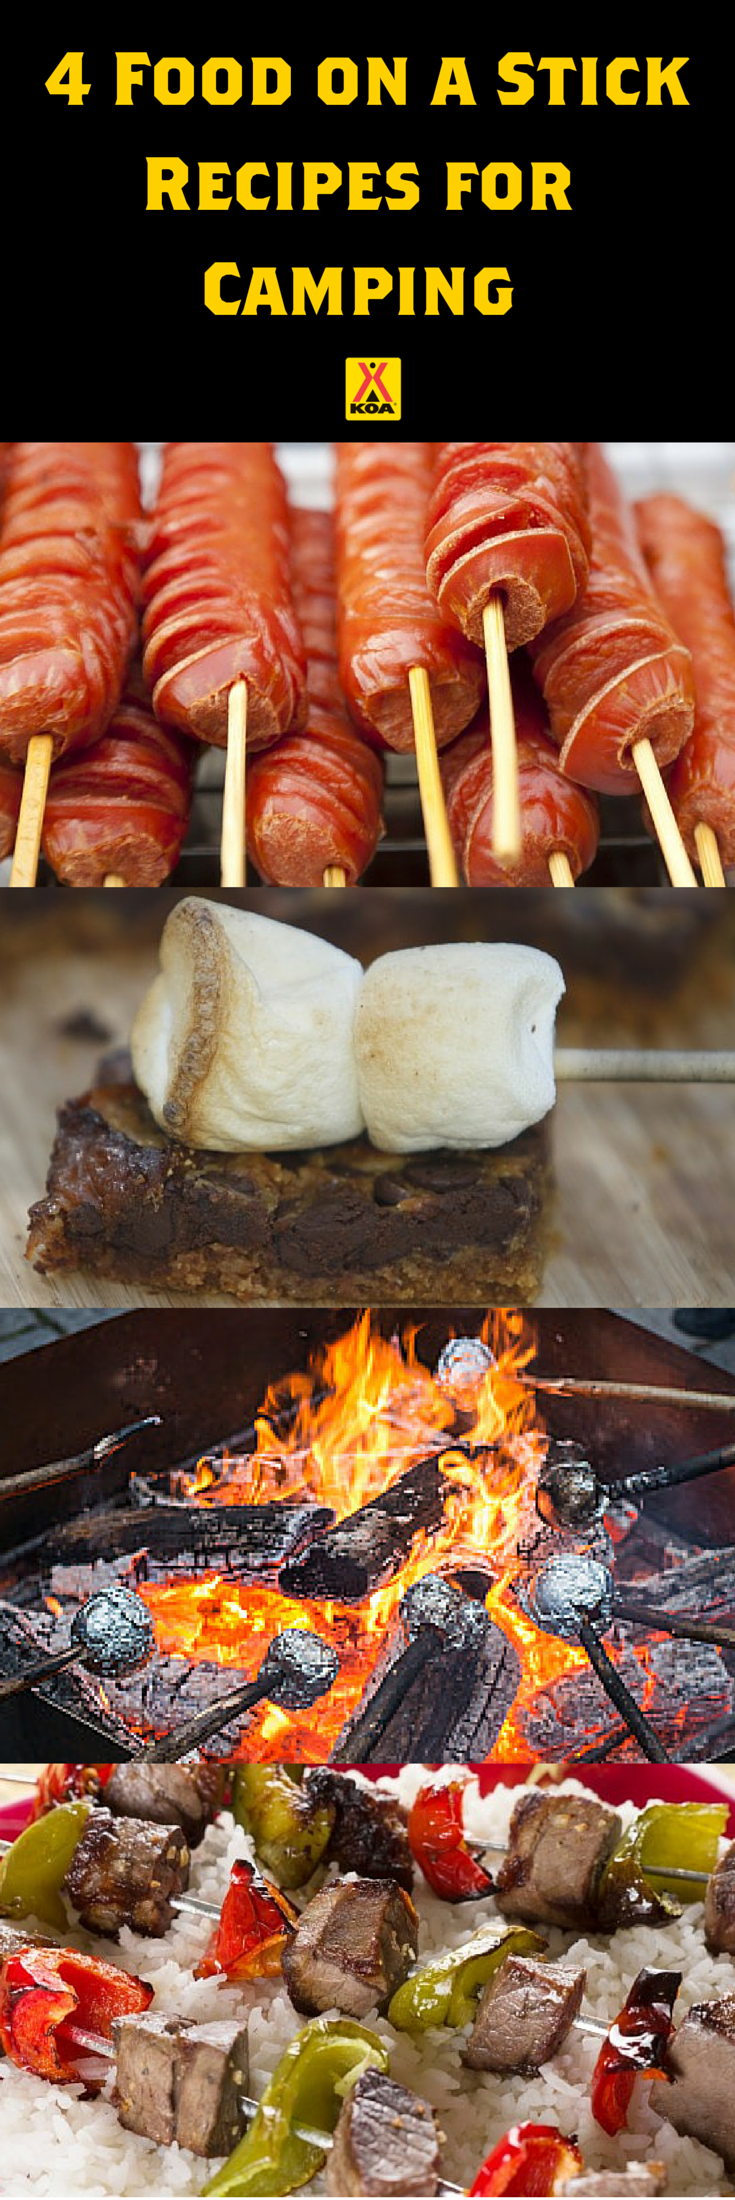 Make these fun camping recipes - all food you can easily make on a stick! 